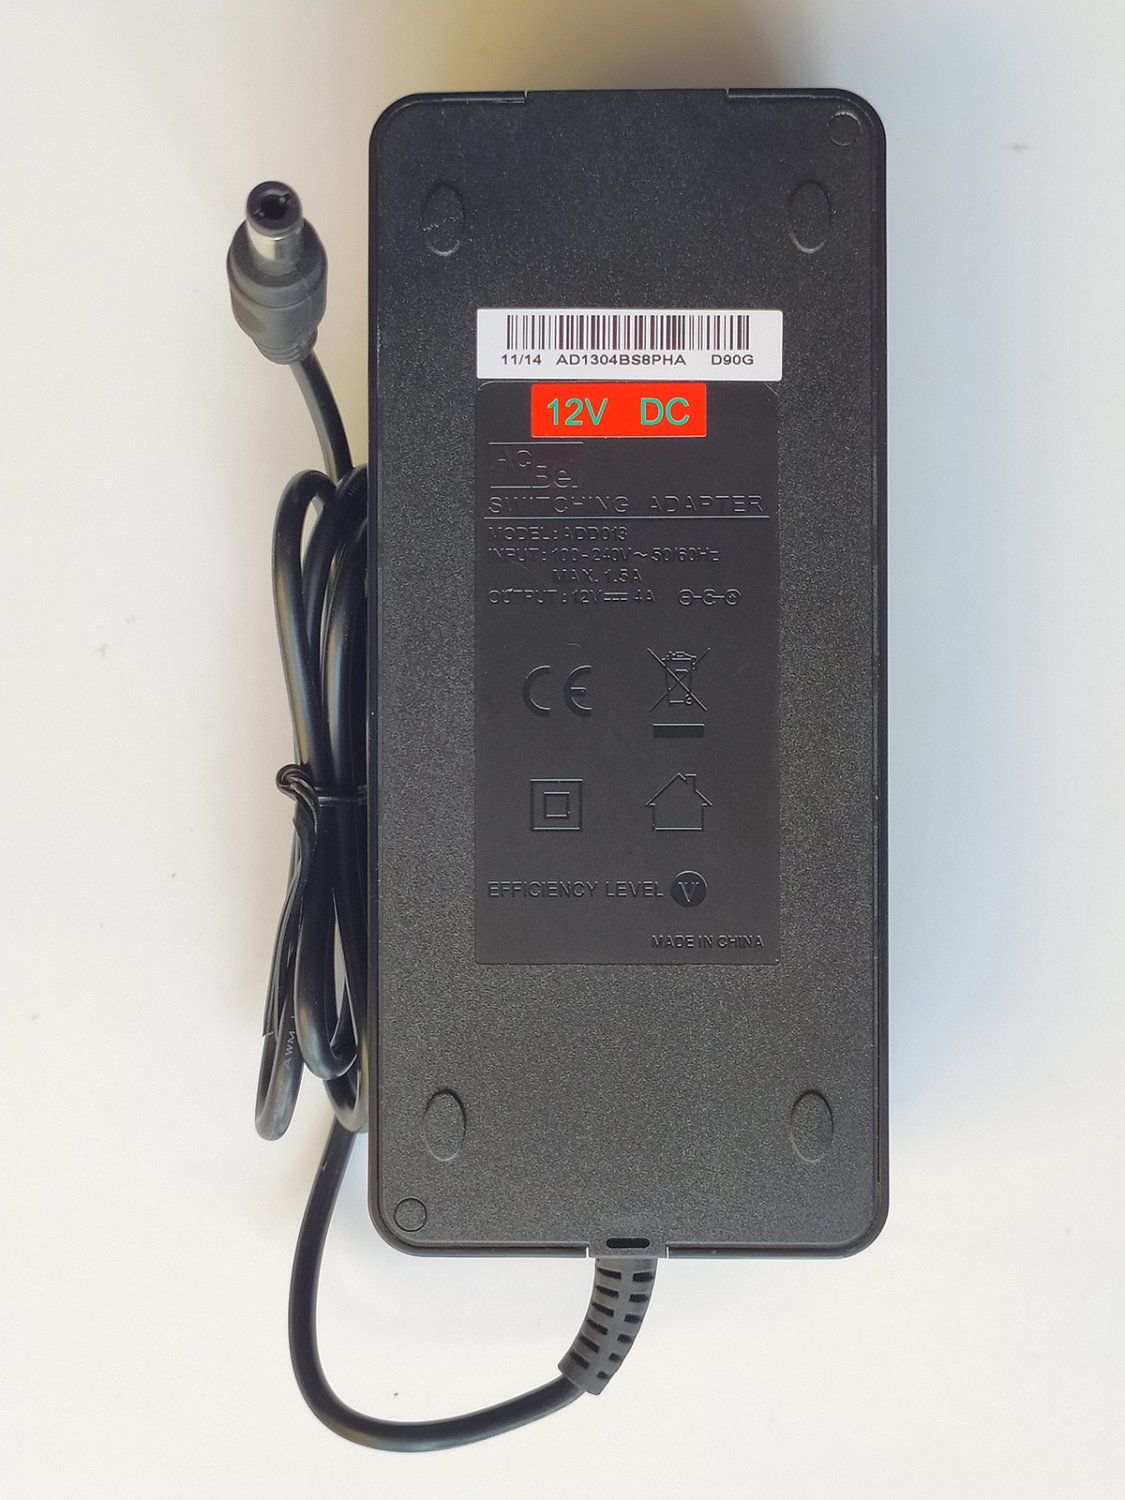 AC/DC Power Supply Adapter for Autel MaxiSys Mini MS905 Scanner Battery Charger